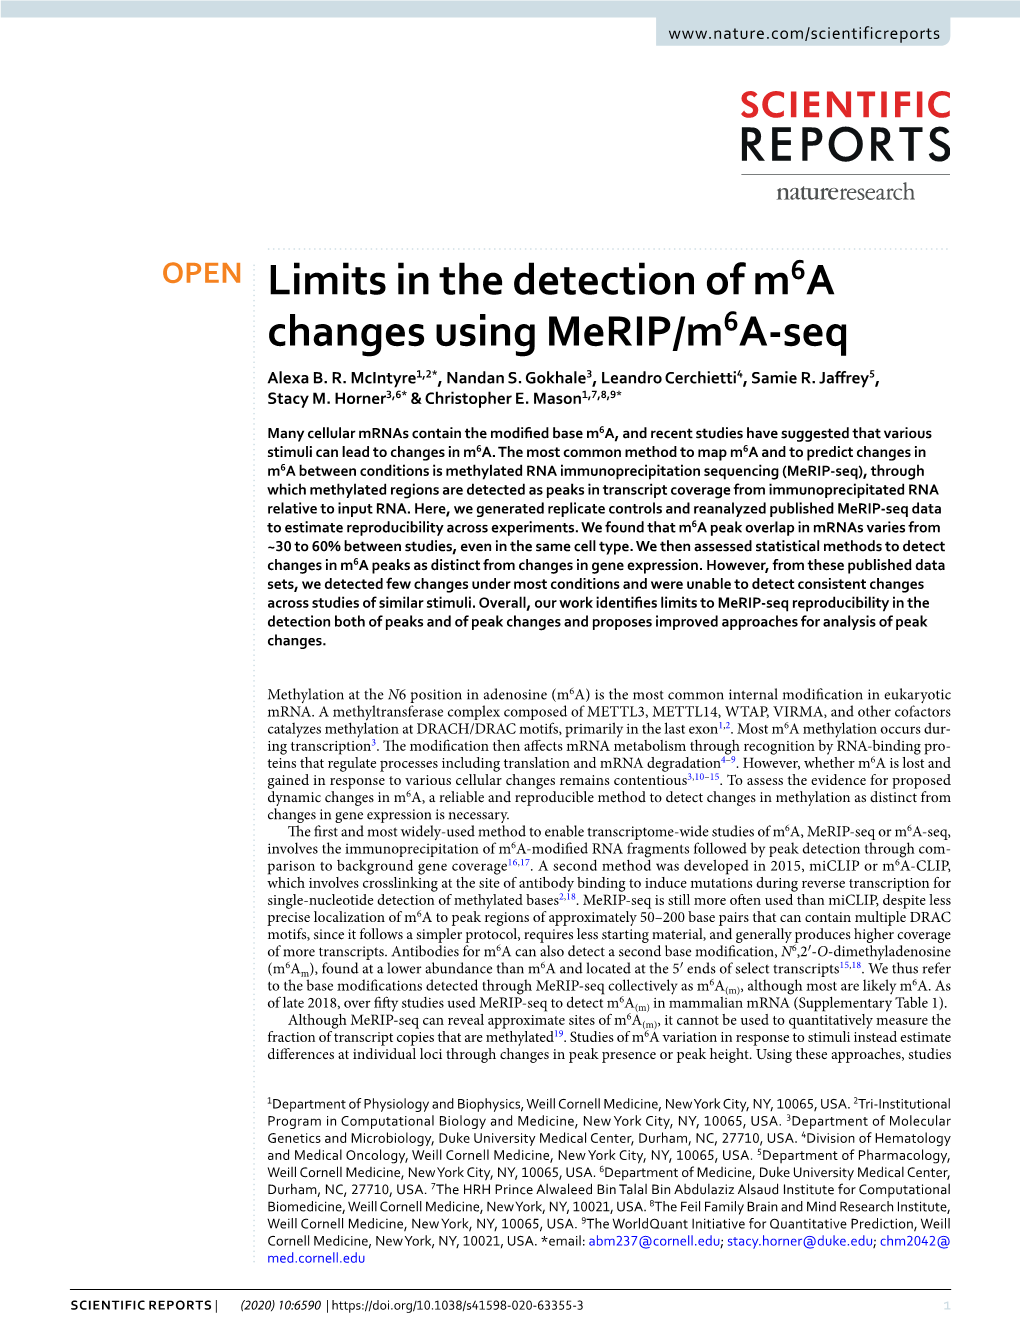 Limits in the Detection of M6a Changes Using Merip/M6a-Seq Alexa B